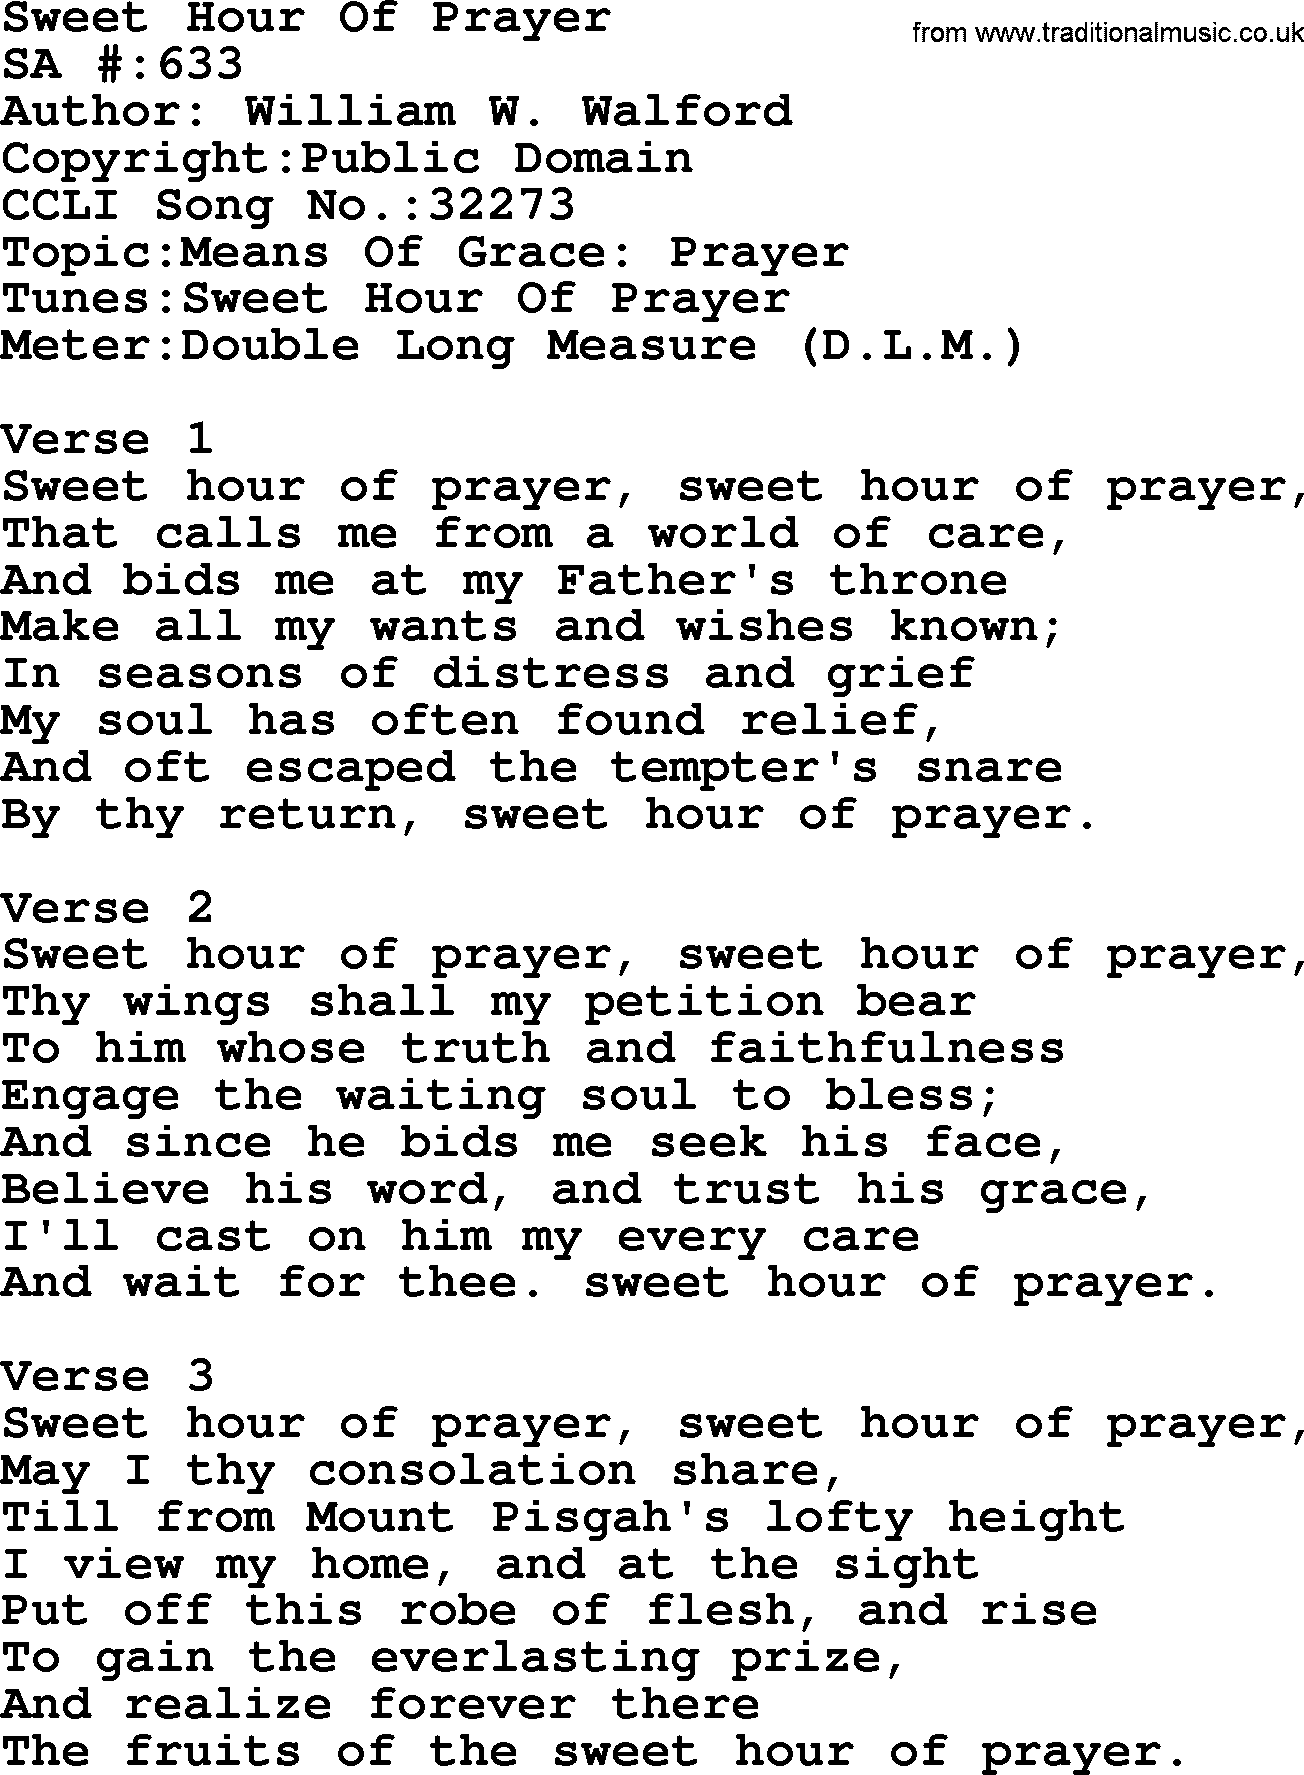 Salvation Army Hymnal, title: Sweet Hour Of Prayer, with lyrics and PDF,